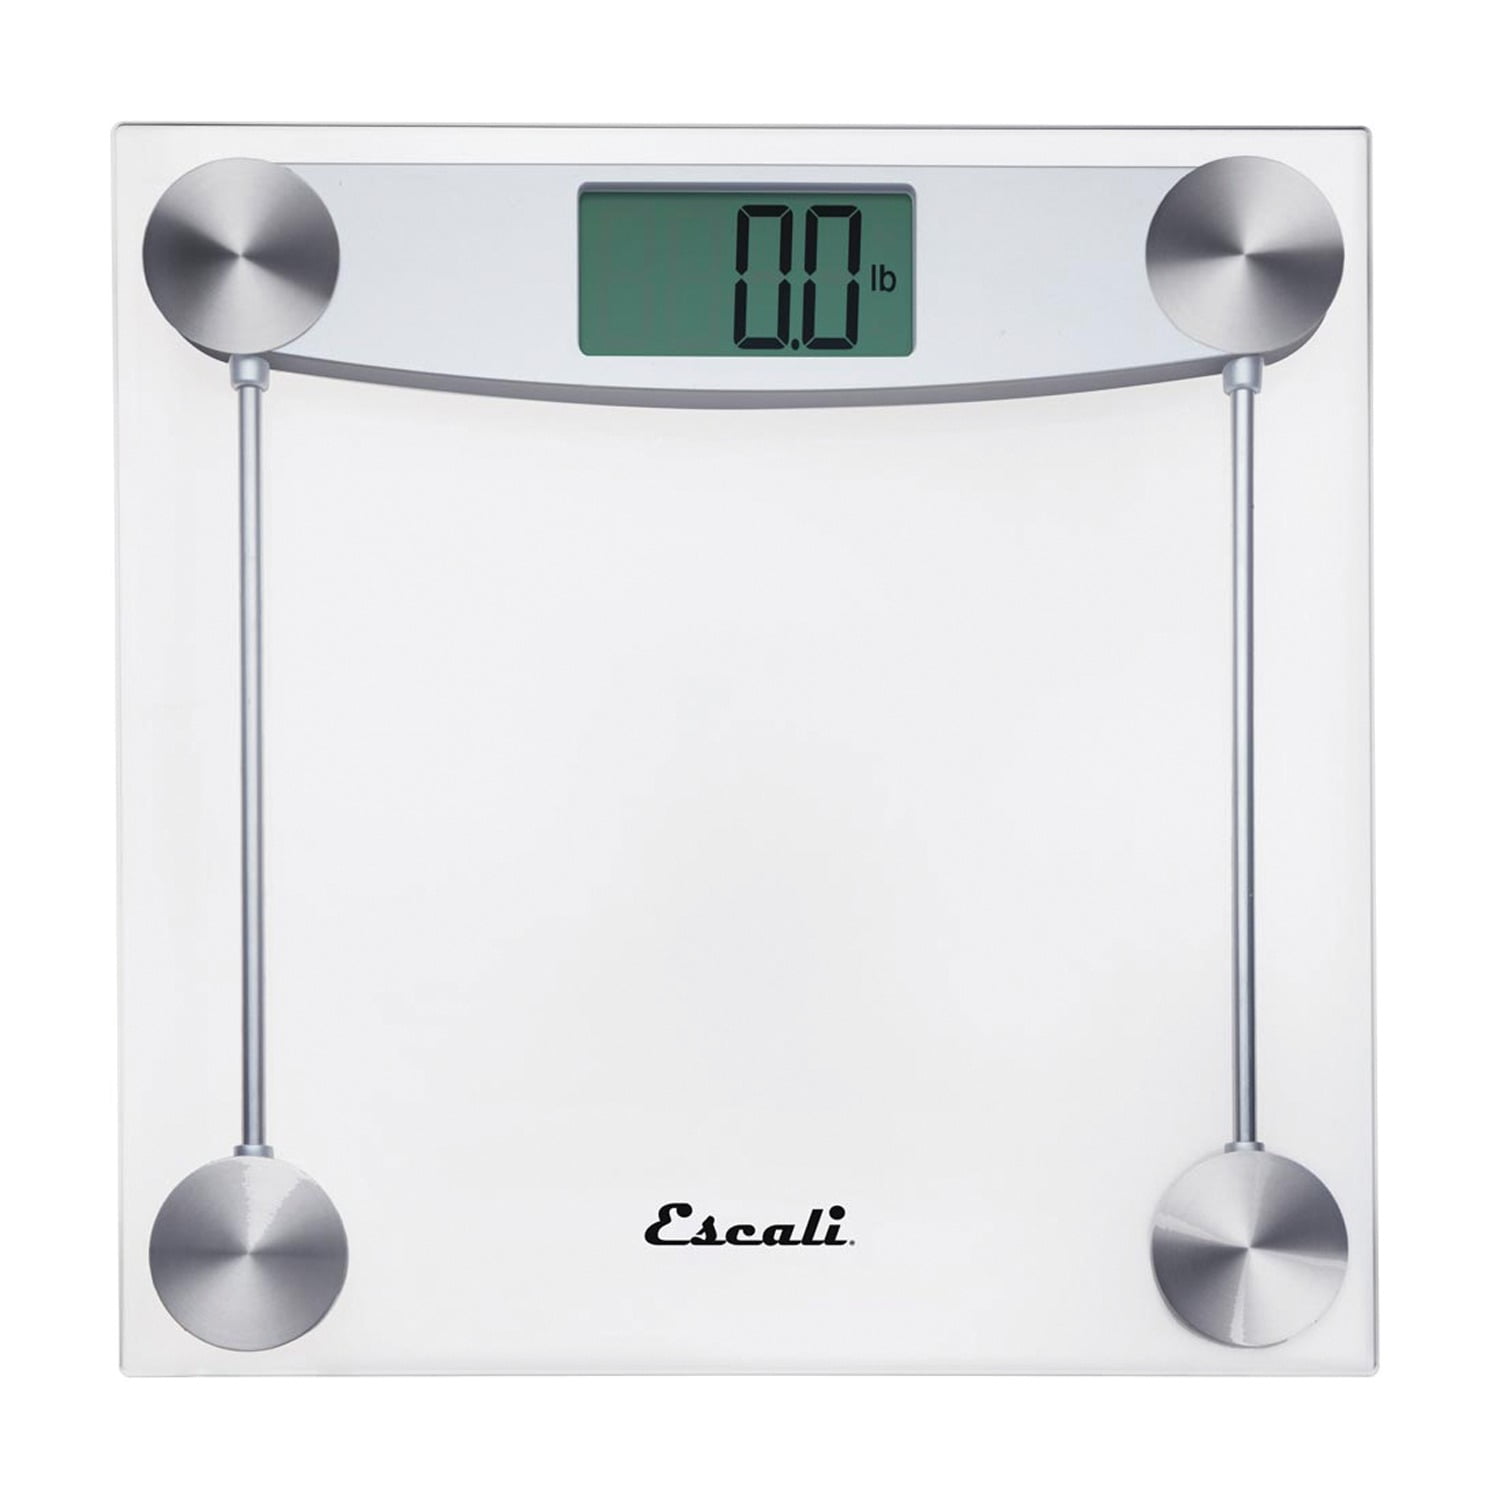 CLEAR GLASS DIGITAL BODY WEIGHT SCALE LARGE NUMBERS BATHROOM